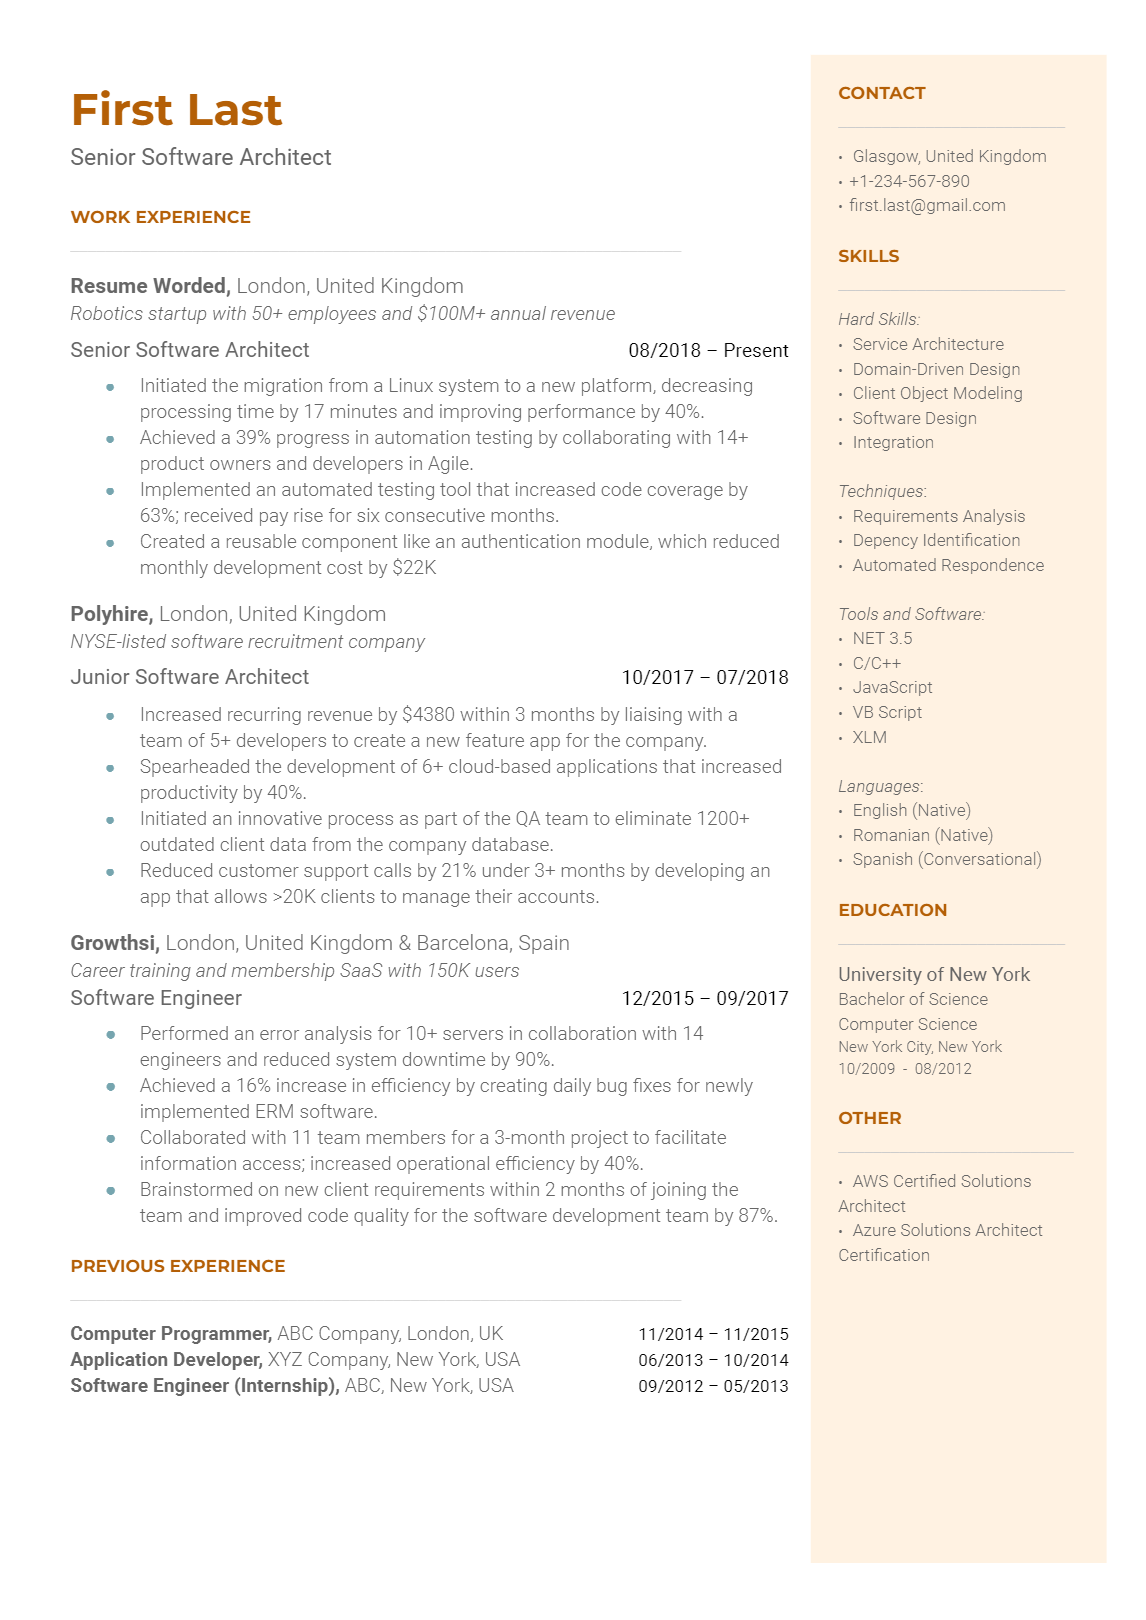 A senior software architect resume template that uses strong action verbs.